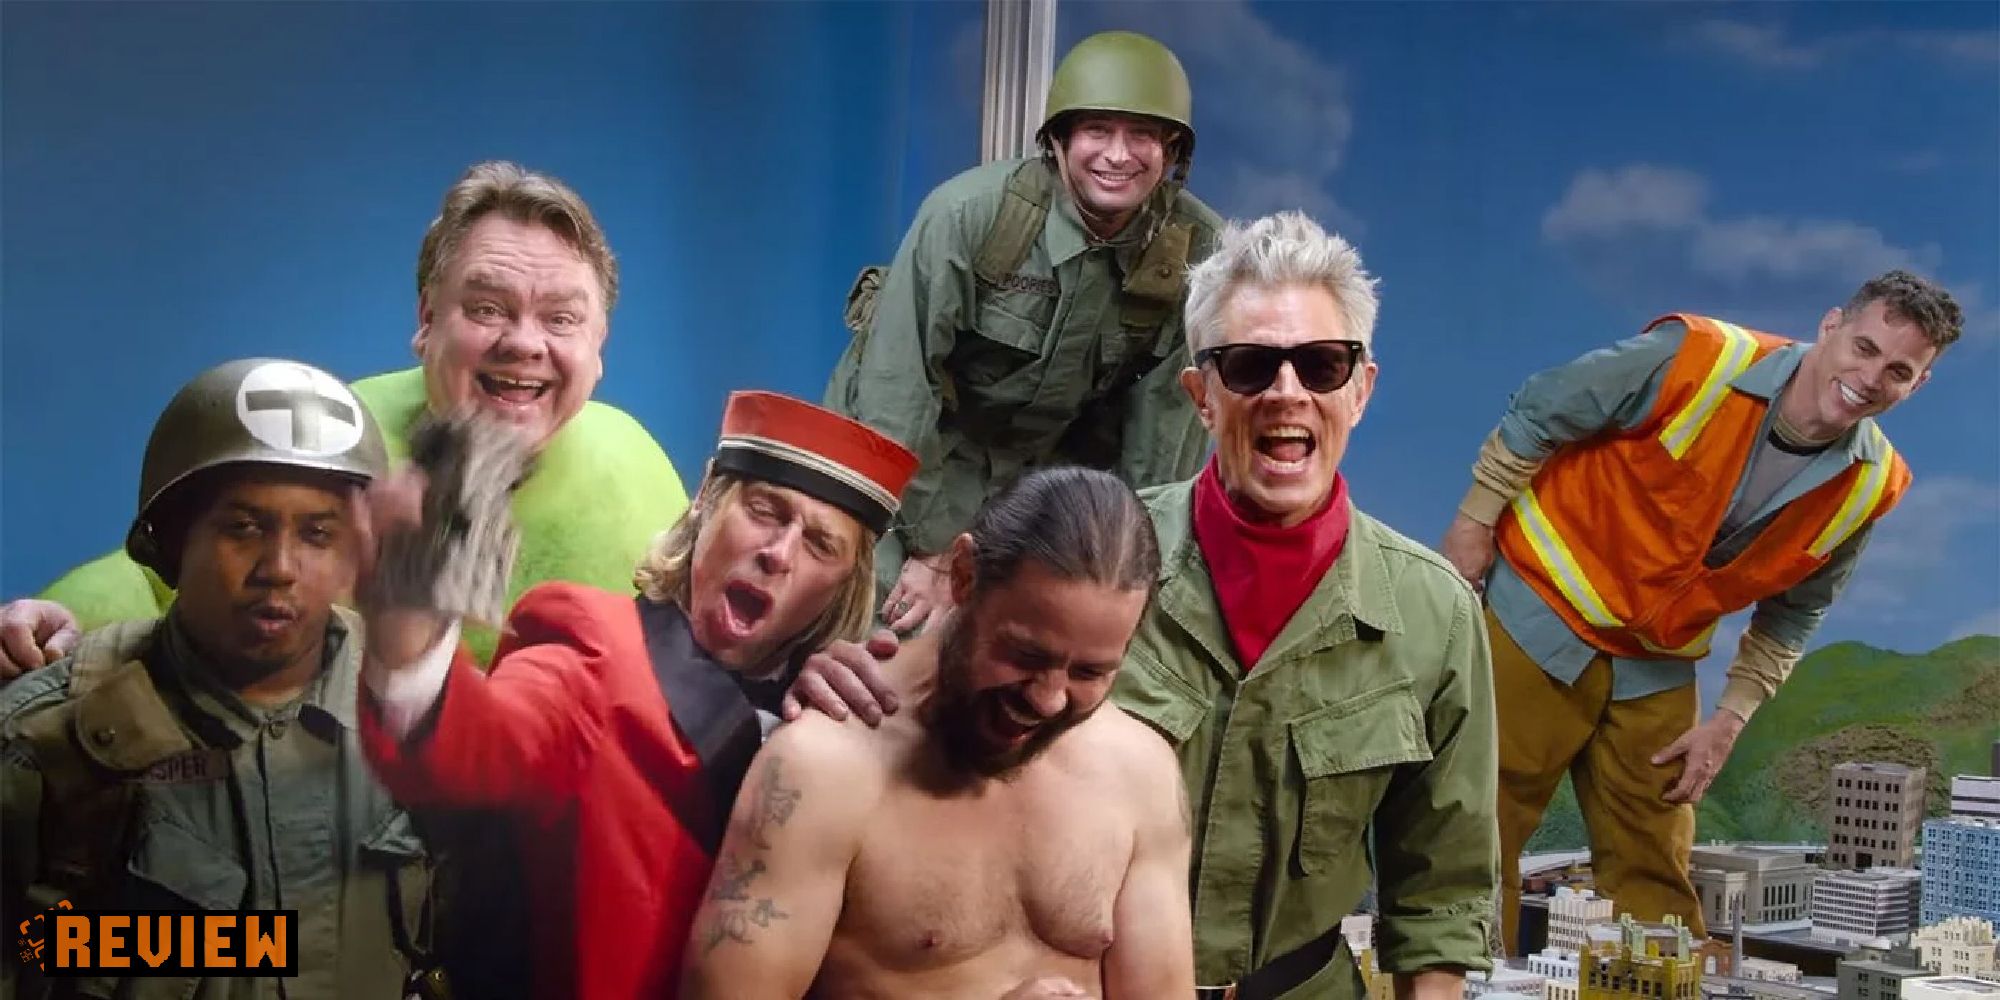 Jackass Forever review - several of the cast are present, knoxville, steve-o, dave england, jasper dolphin, chris pontius, and preston lacy (and one i don't recognise)